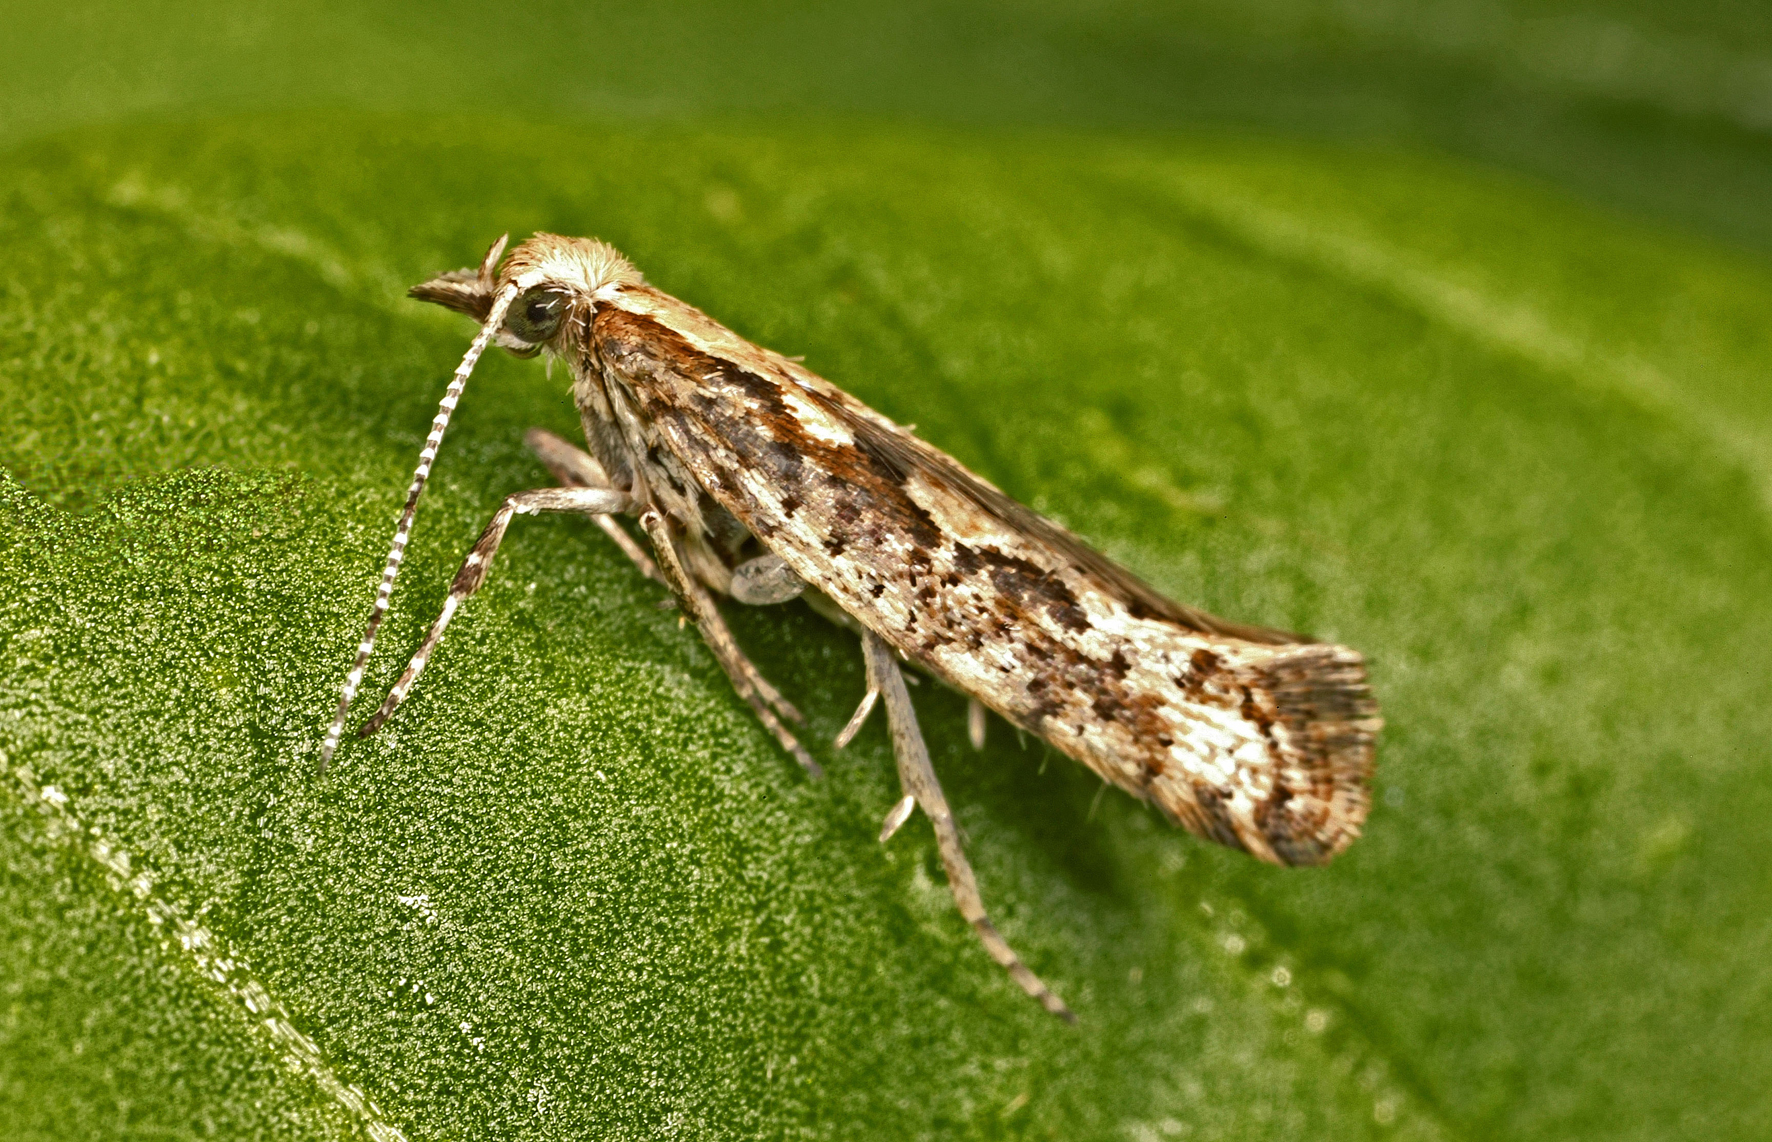 The diamondback moth, widely considered an agricultural pest, is found all over the world and feeds on vegetables like cabbages, broccoli, and cauliflower.